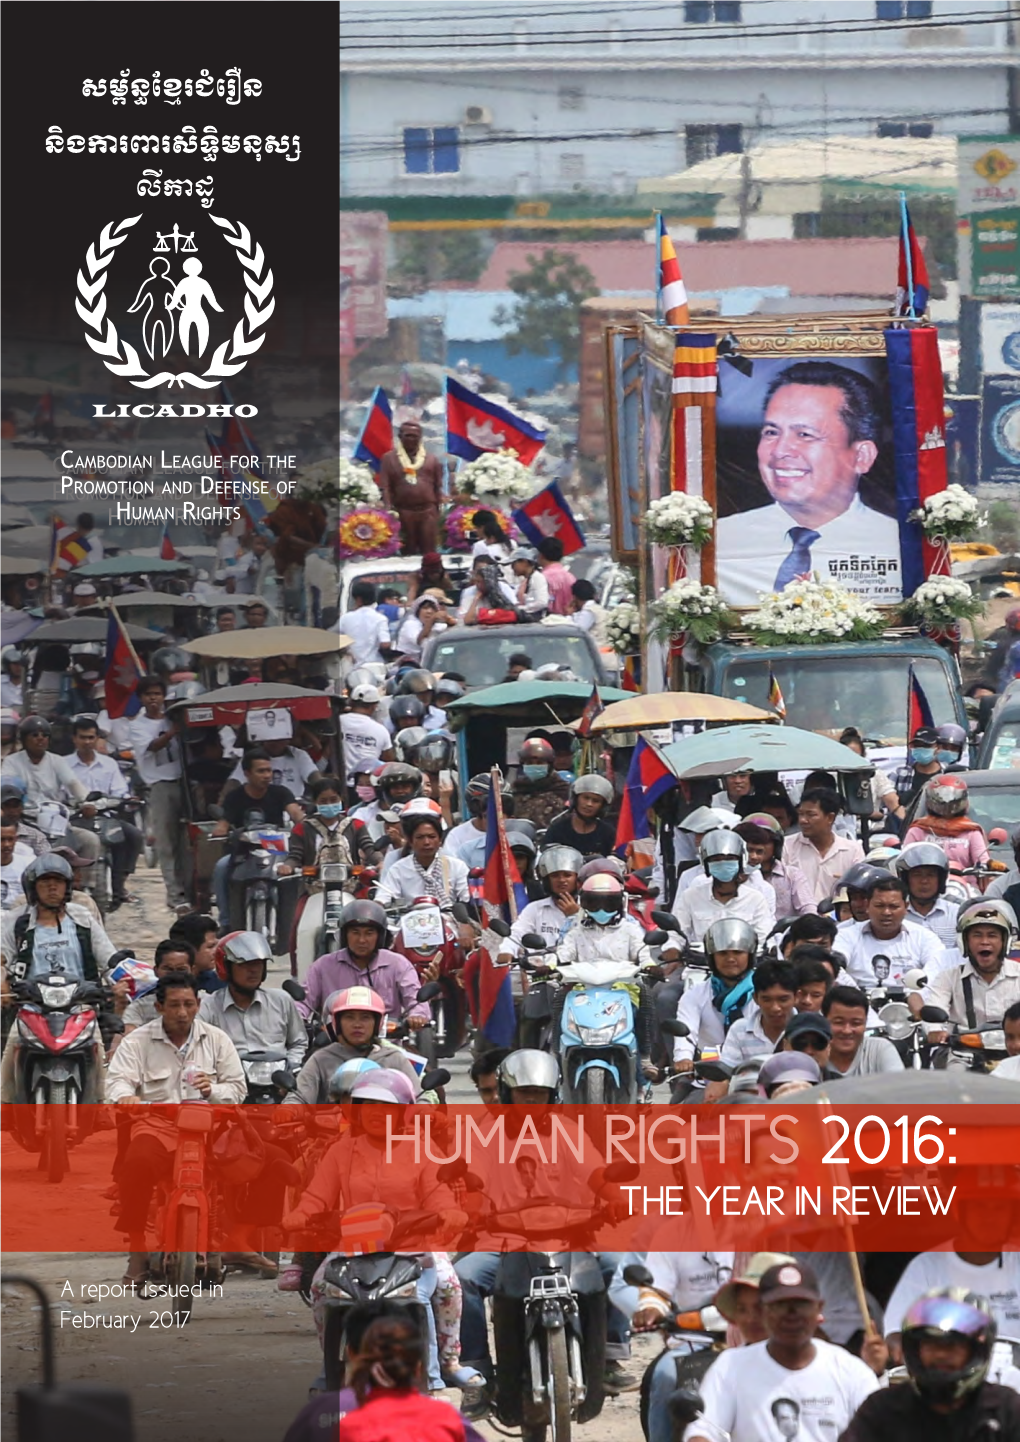 Human Rights 2016: the Year in Review